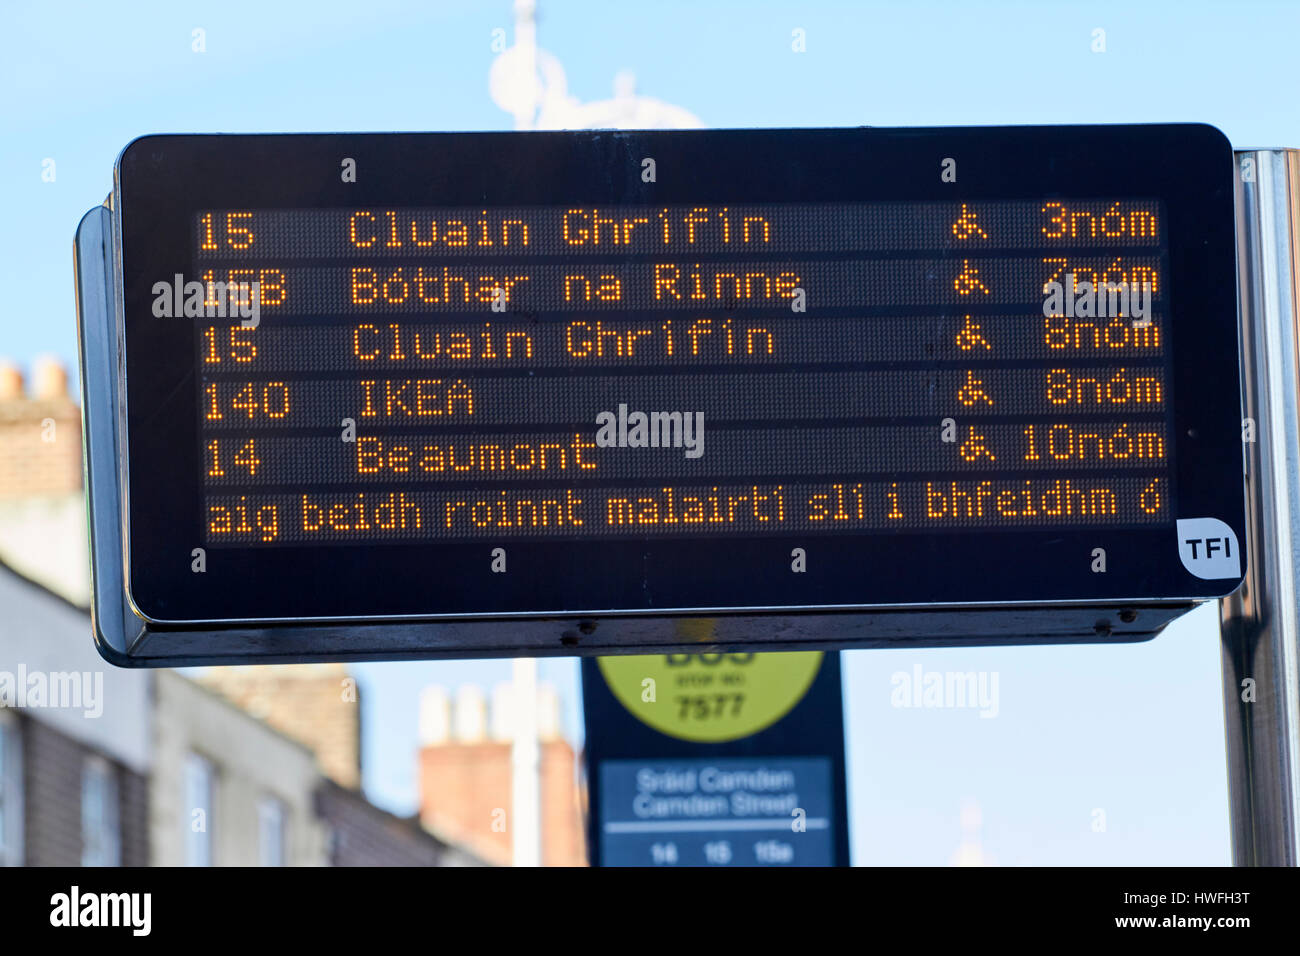 electronic sign with bus information in irish and times at city centre bus stop Dublin Republic of Ireland Stock Photo